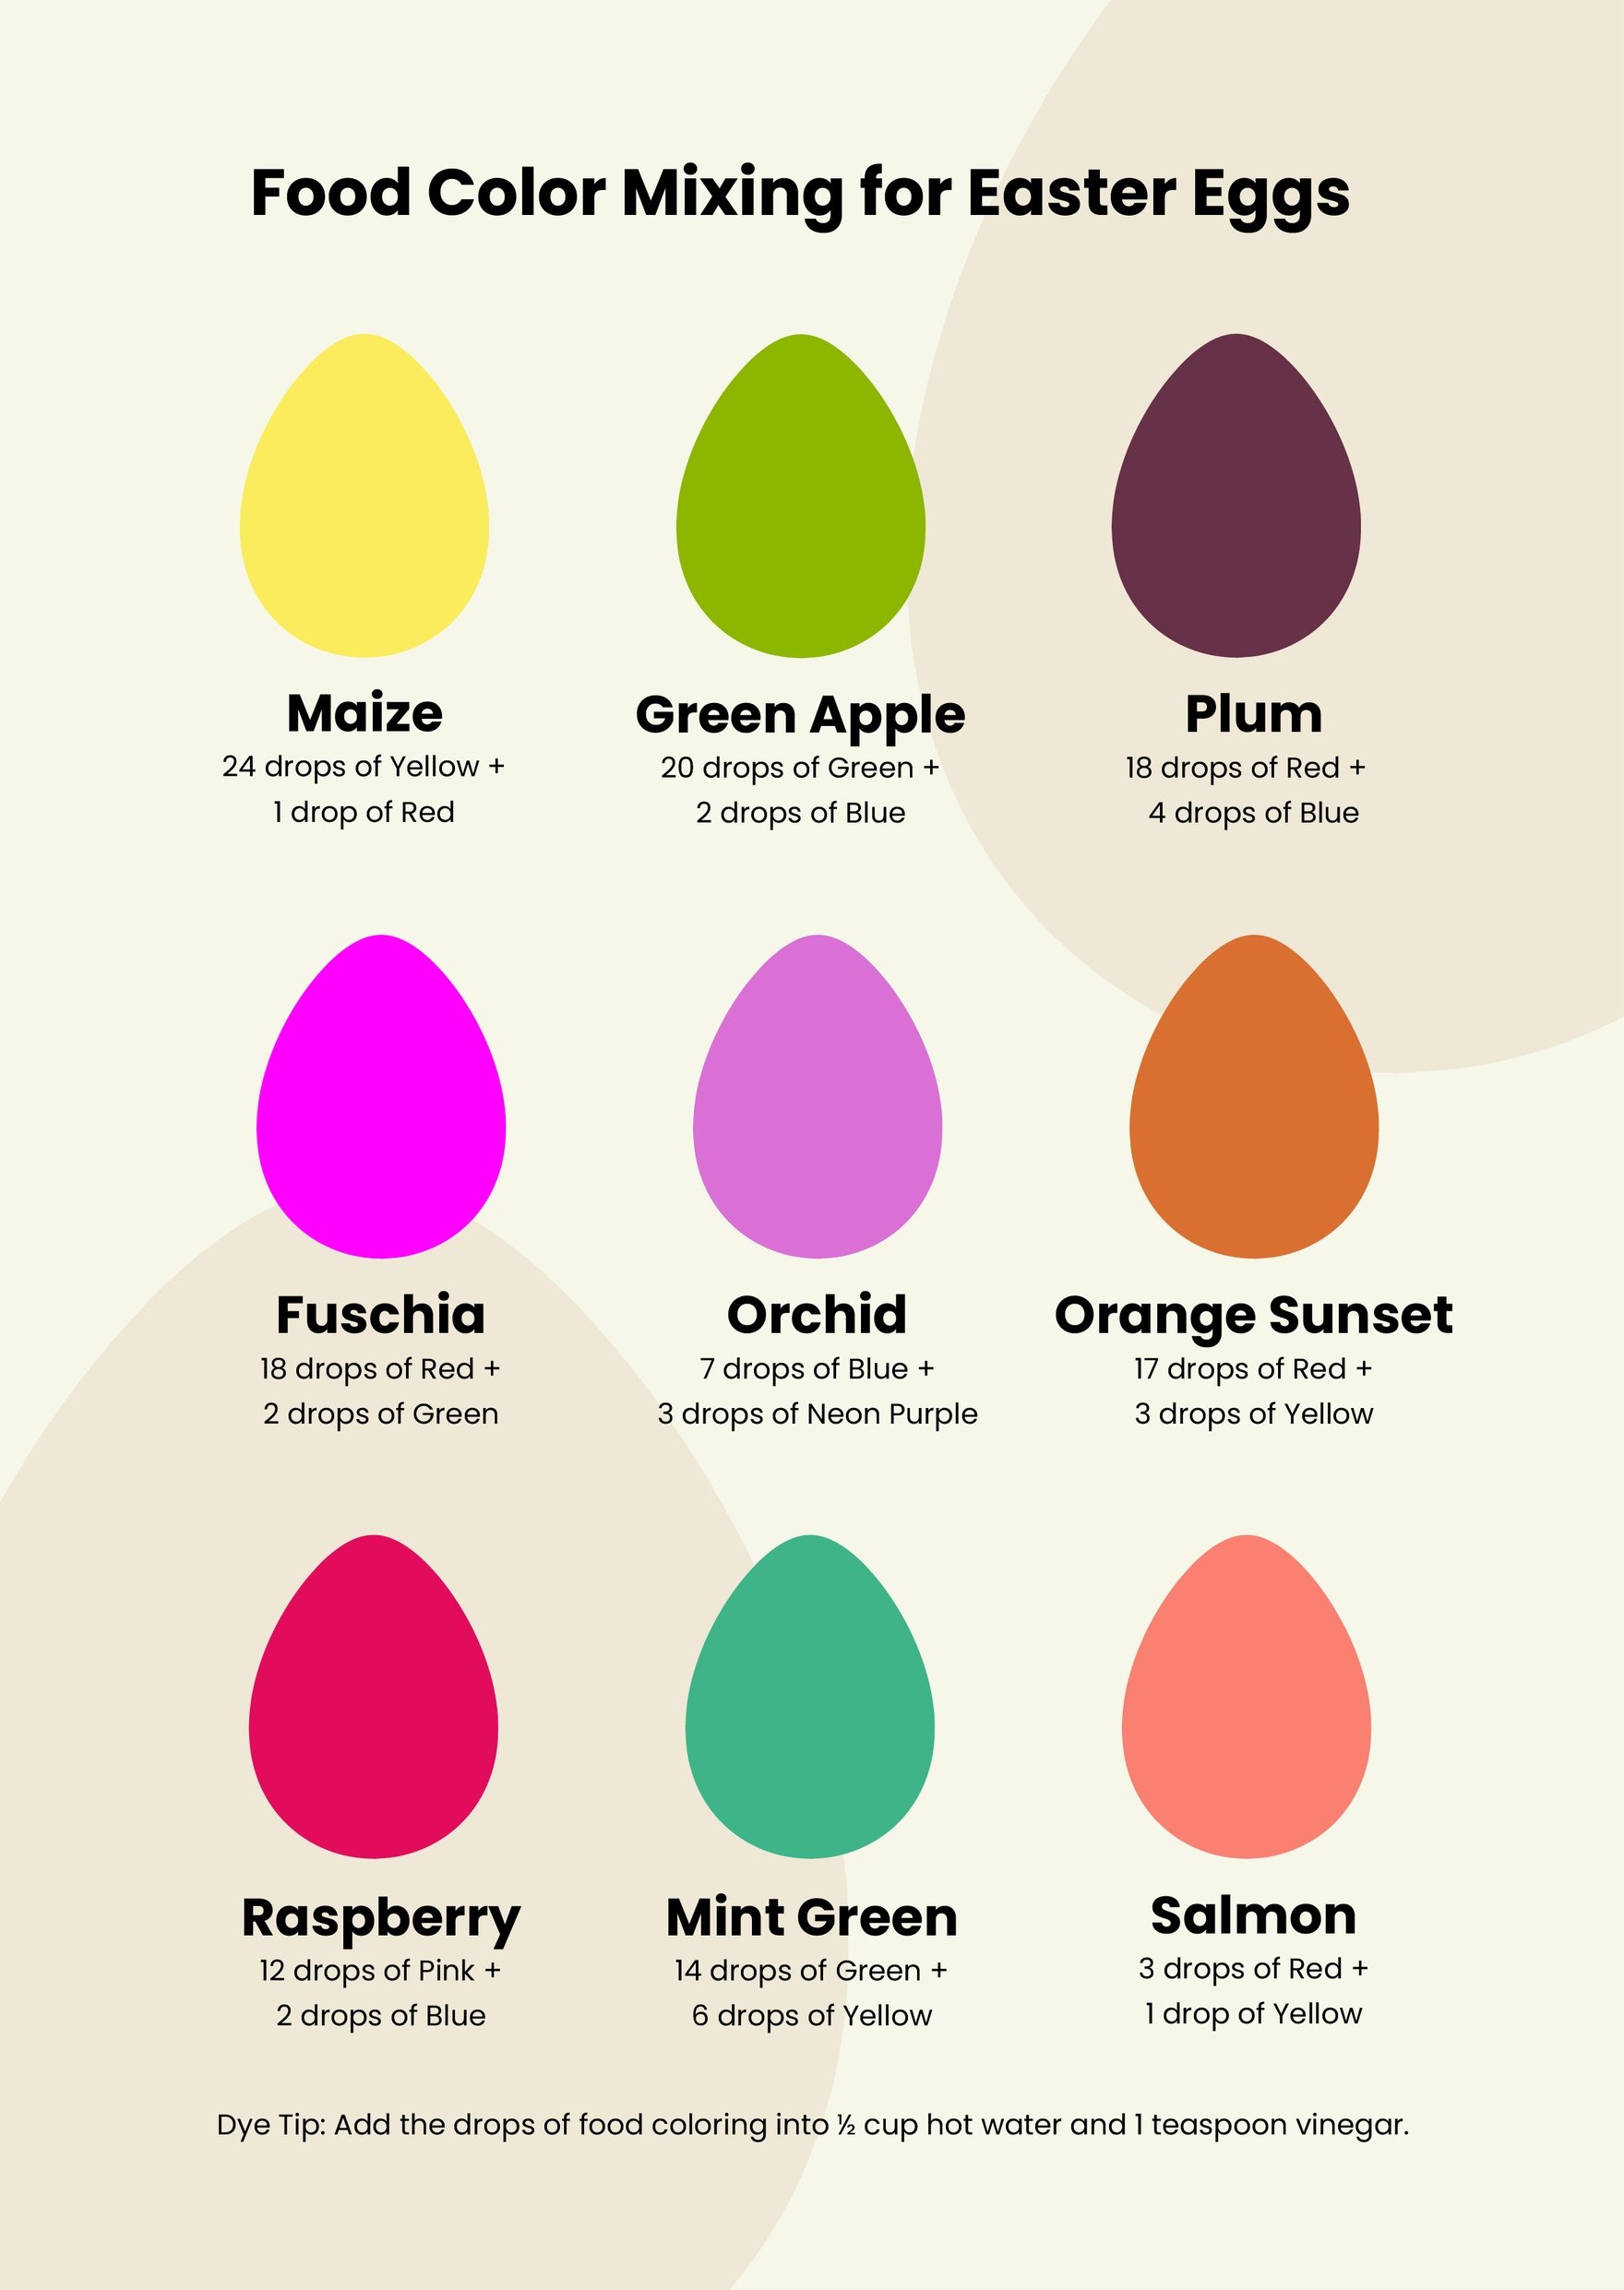 Food Coloring Chart For Eggs in PDF, Illustrator